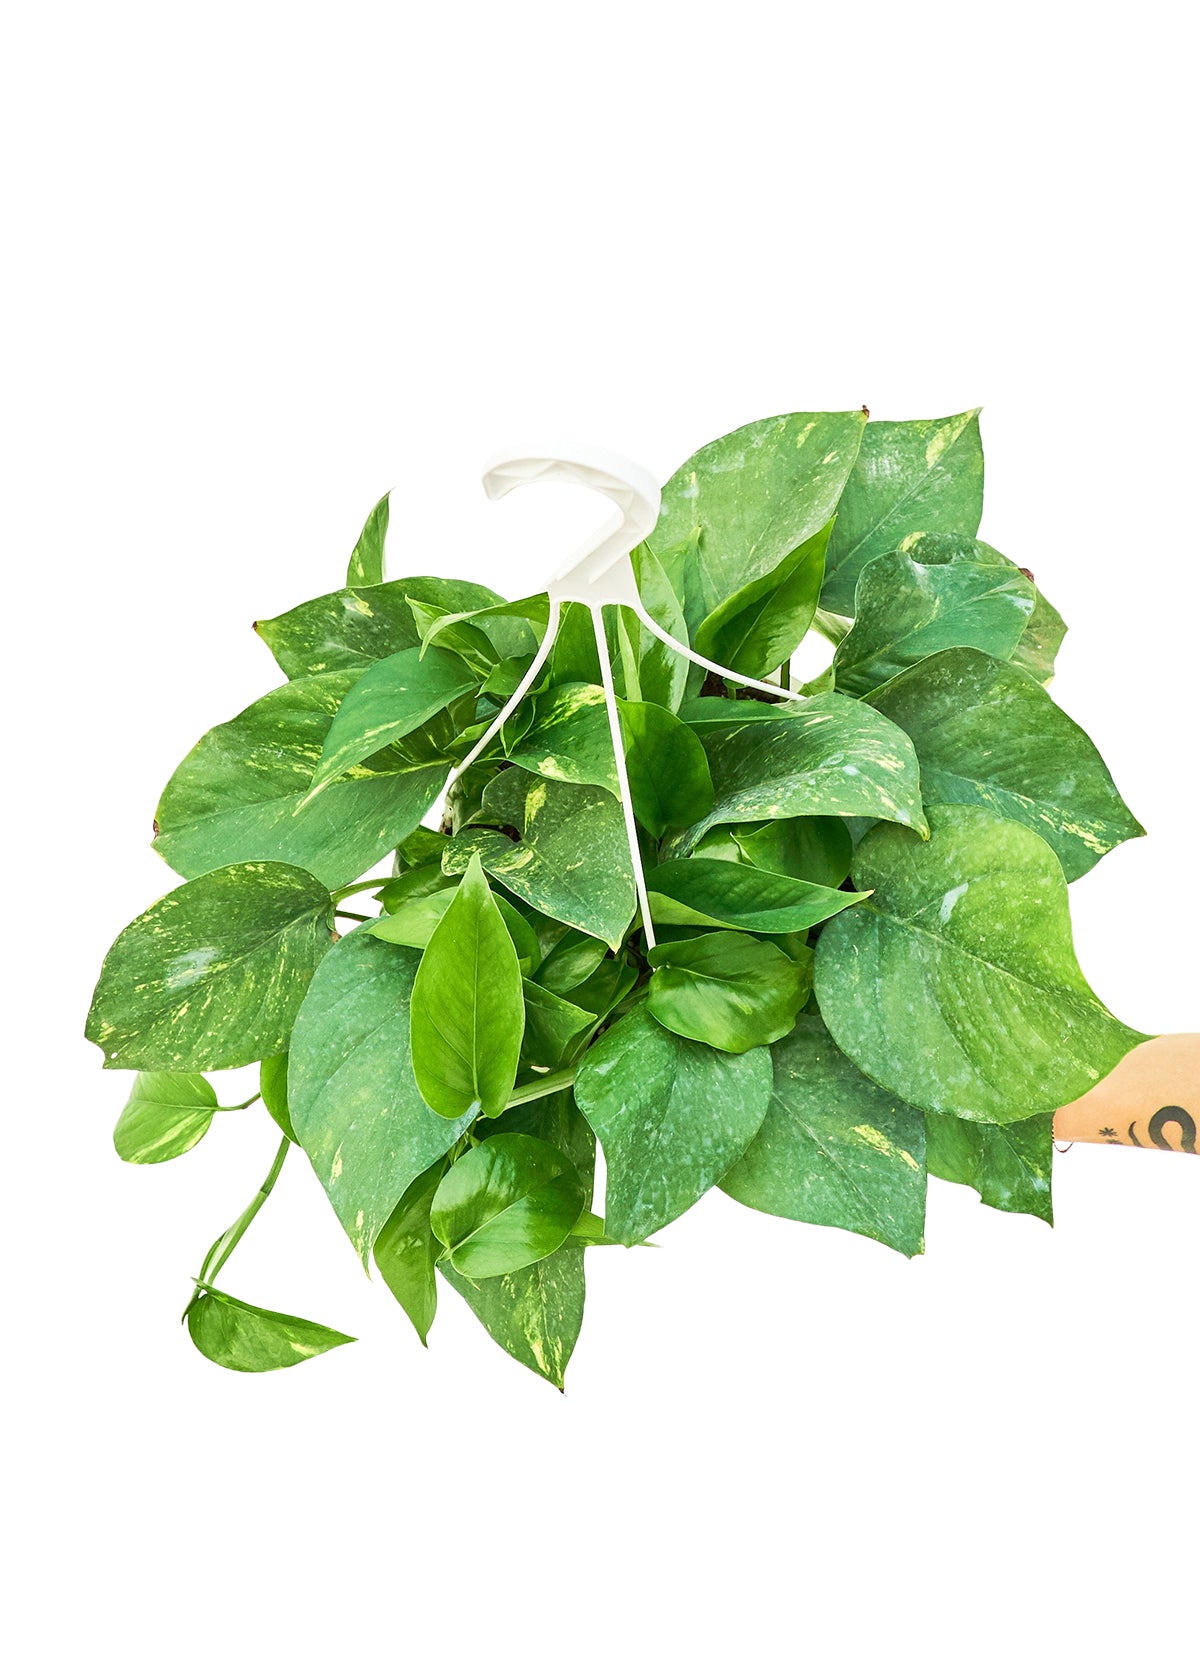 Large size Golden Pothos in a planters hanging pot with a white background with a hand holding the bottom of the pot to show the top view